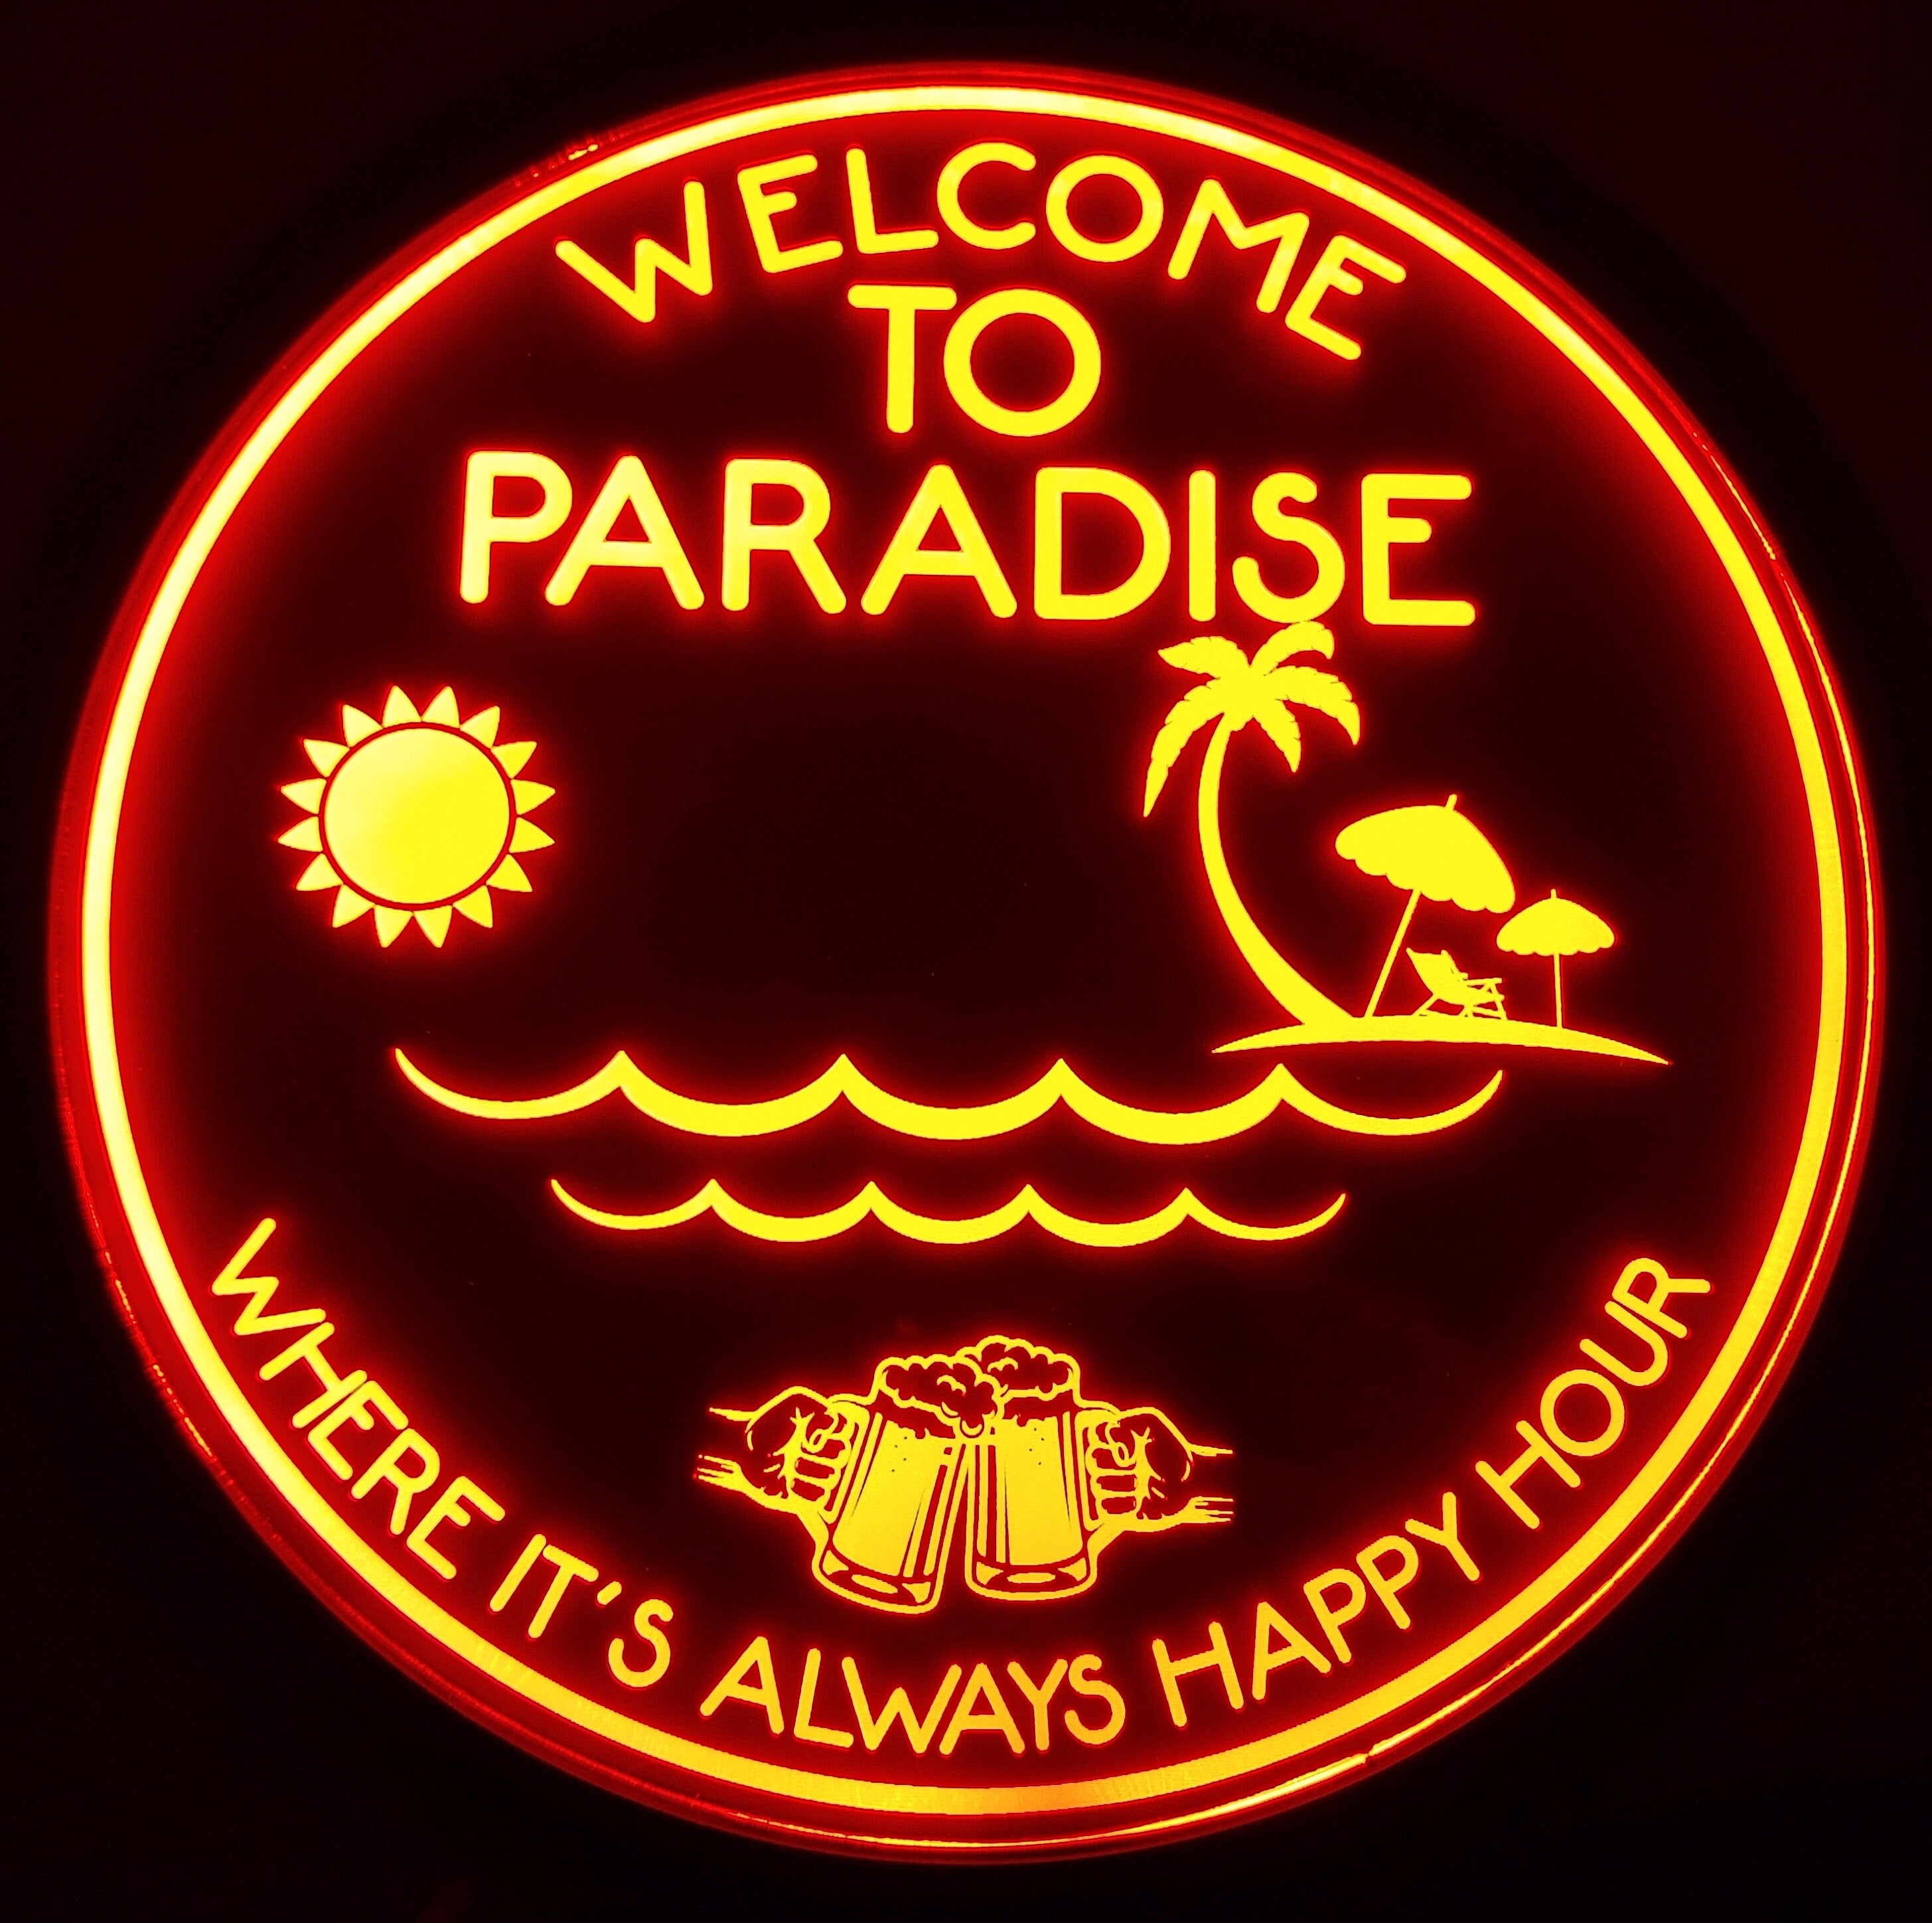 Welcome to Paradise Sign LED Wall Sign Neon Like - Color Changing Remote Control - 5 Sizes Made in USA Free Shipping